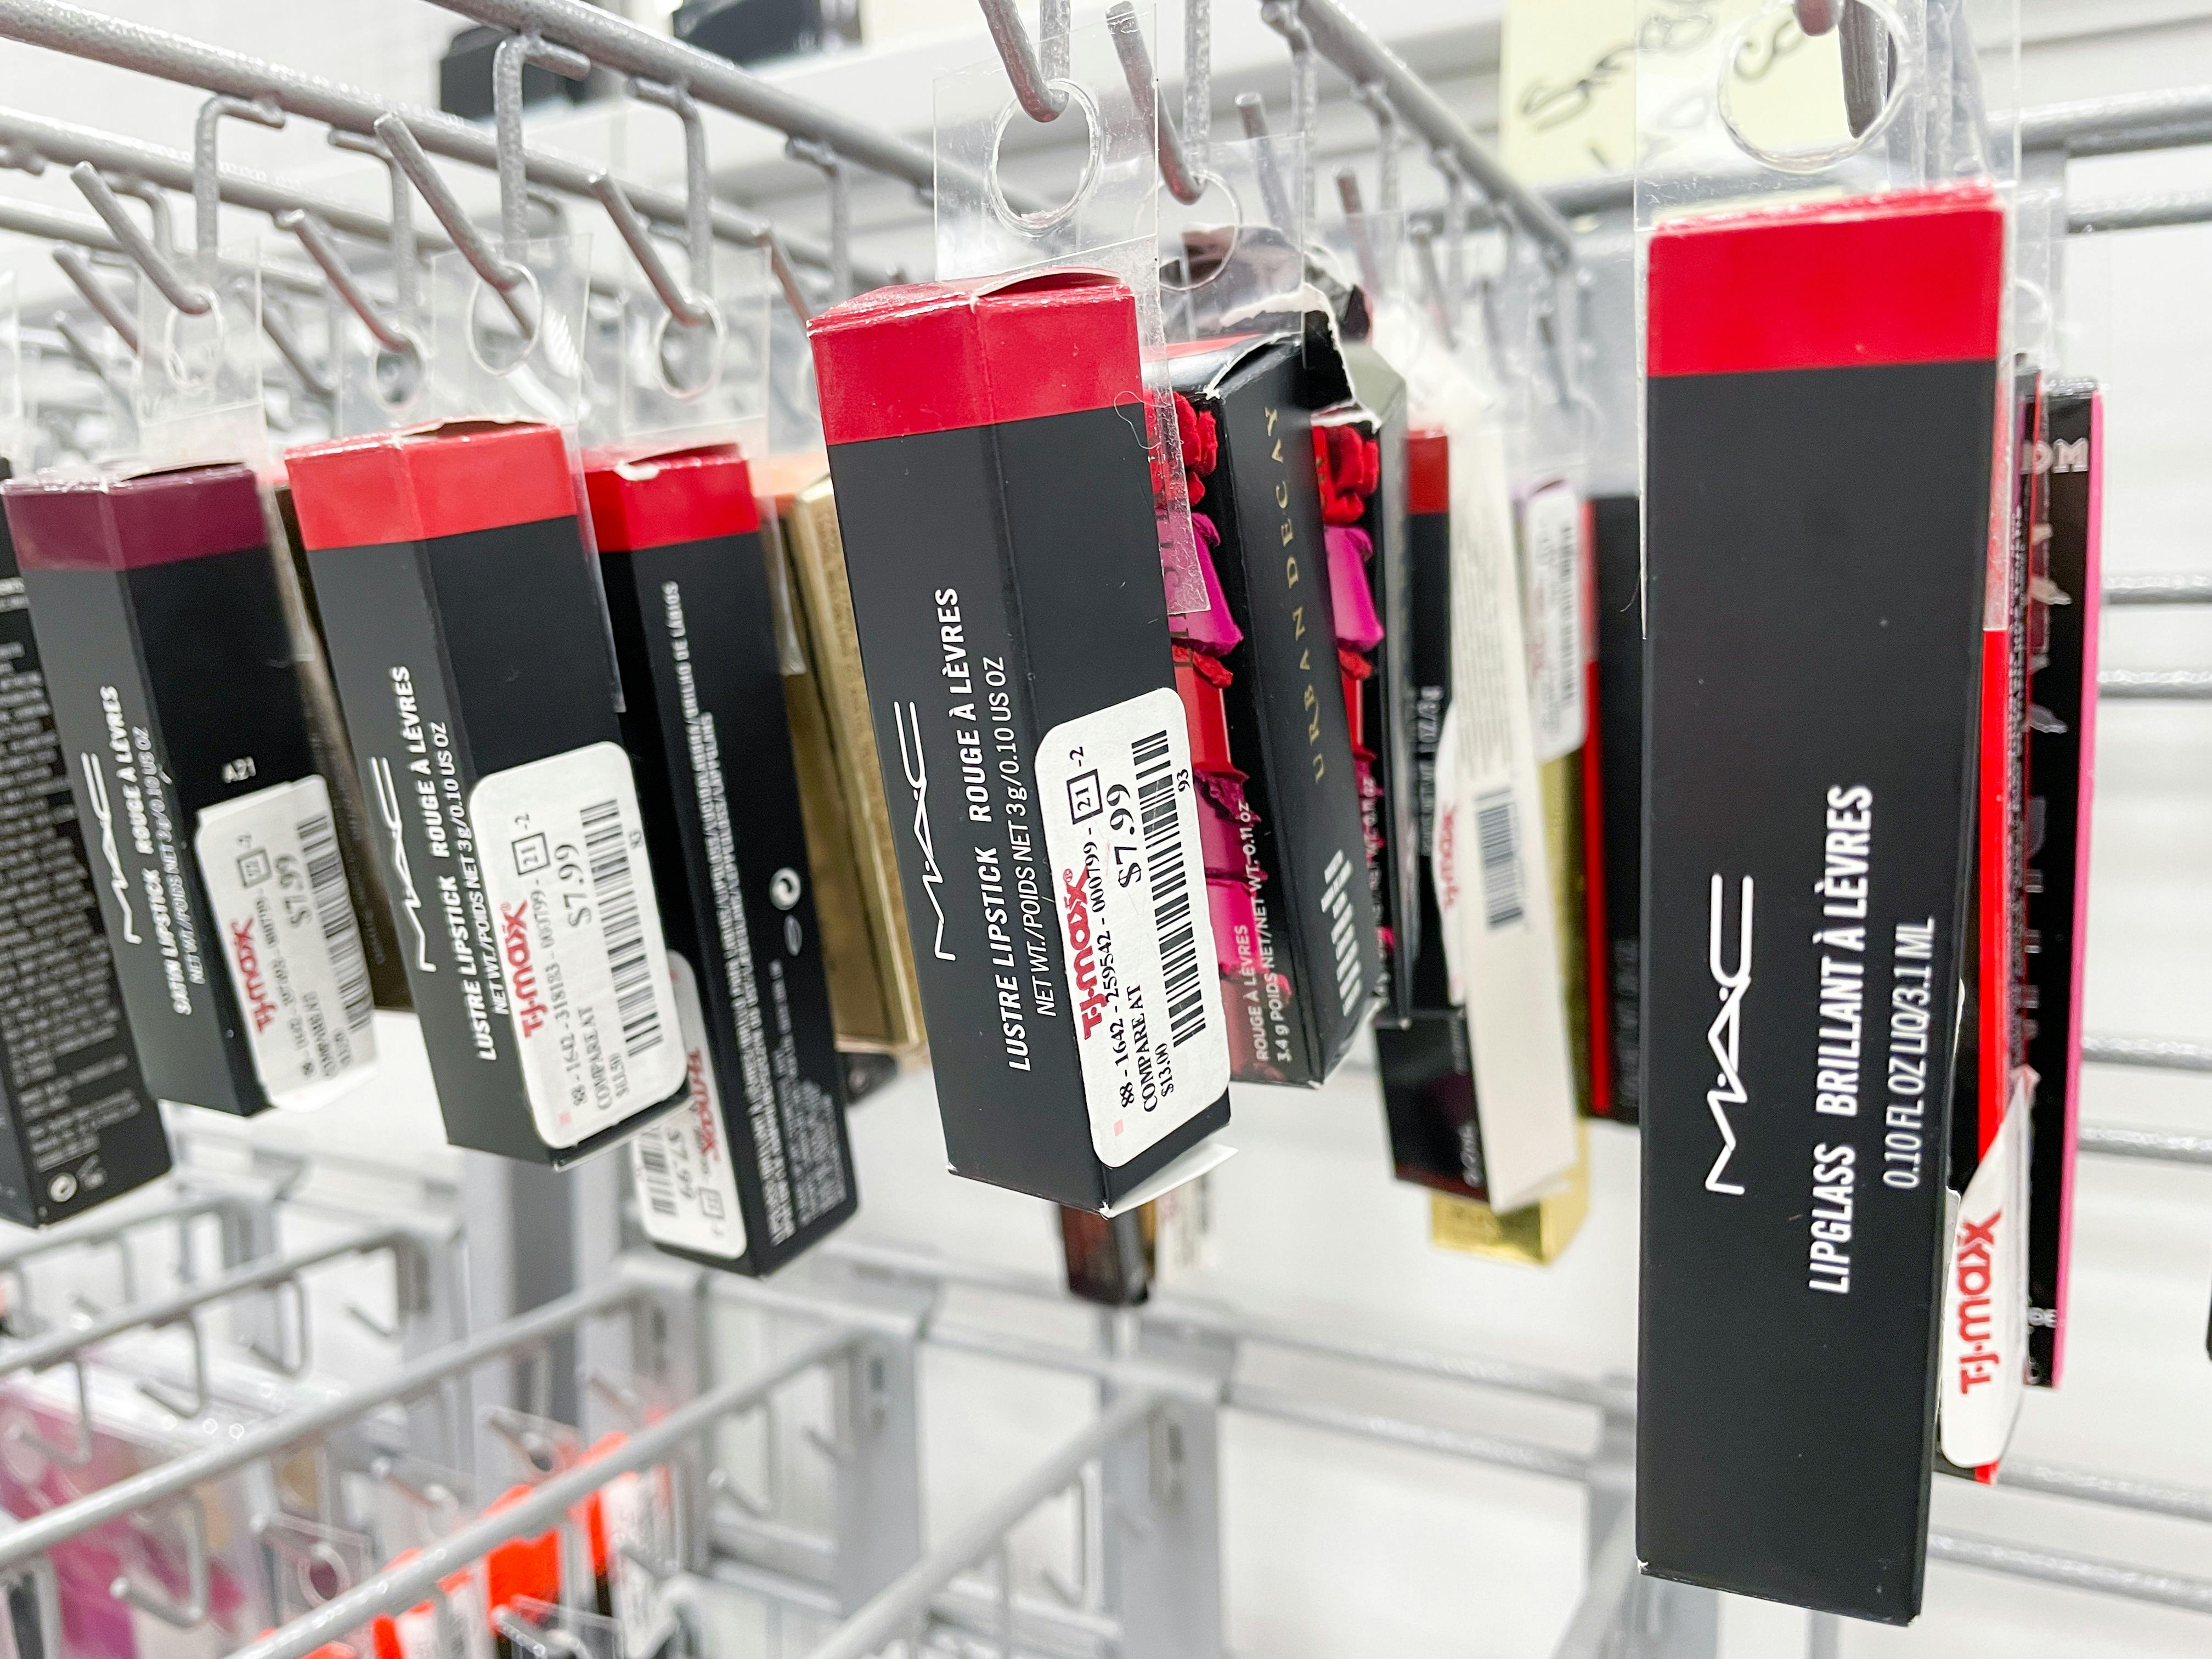 How to Find The Best Beauty Stuff At TJ Maxx